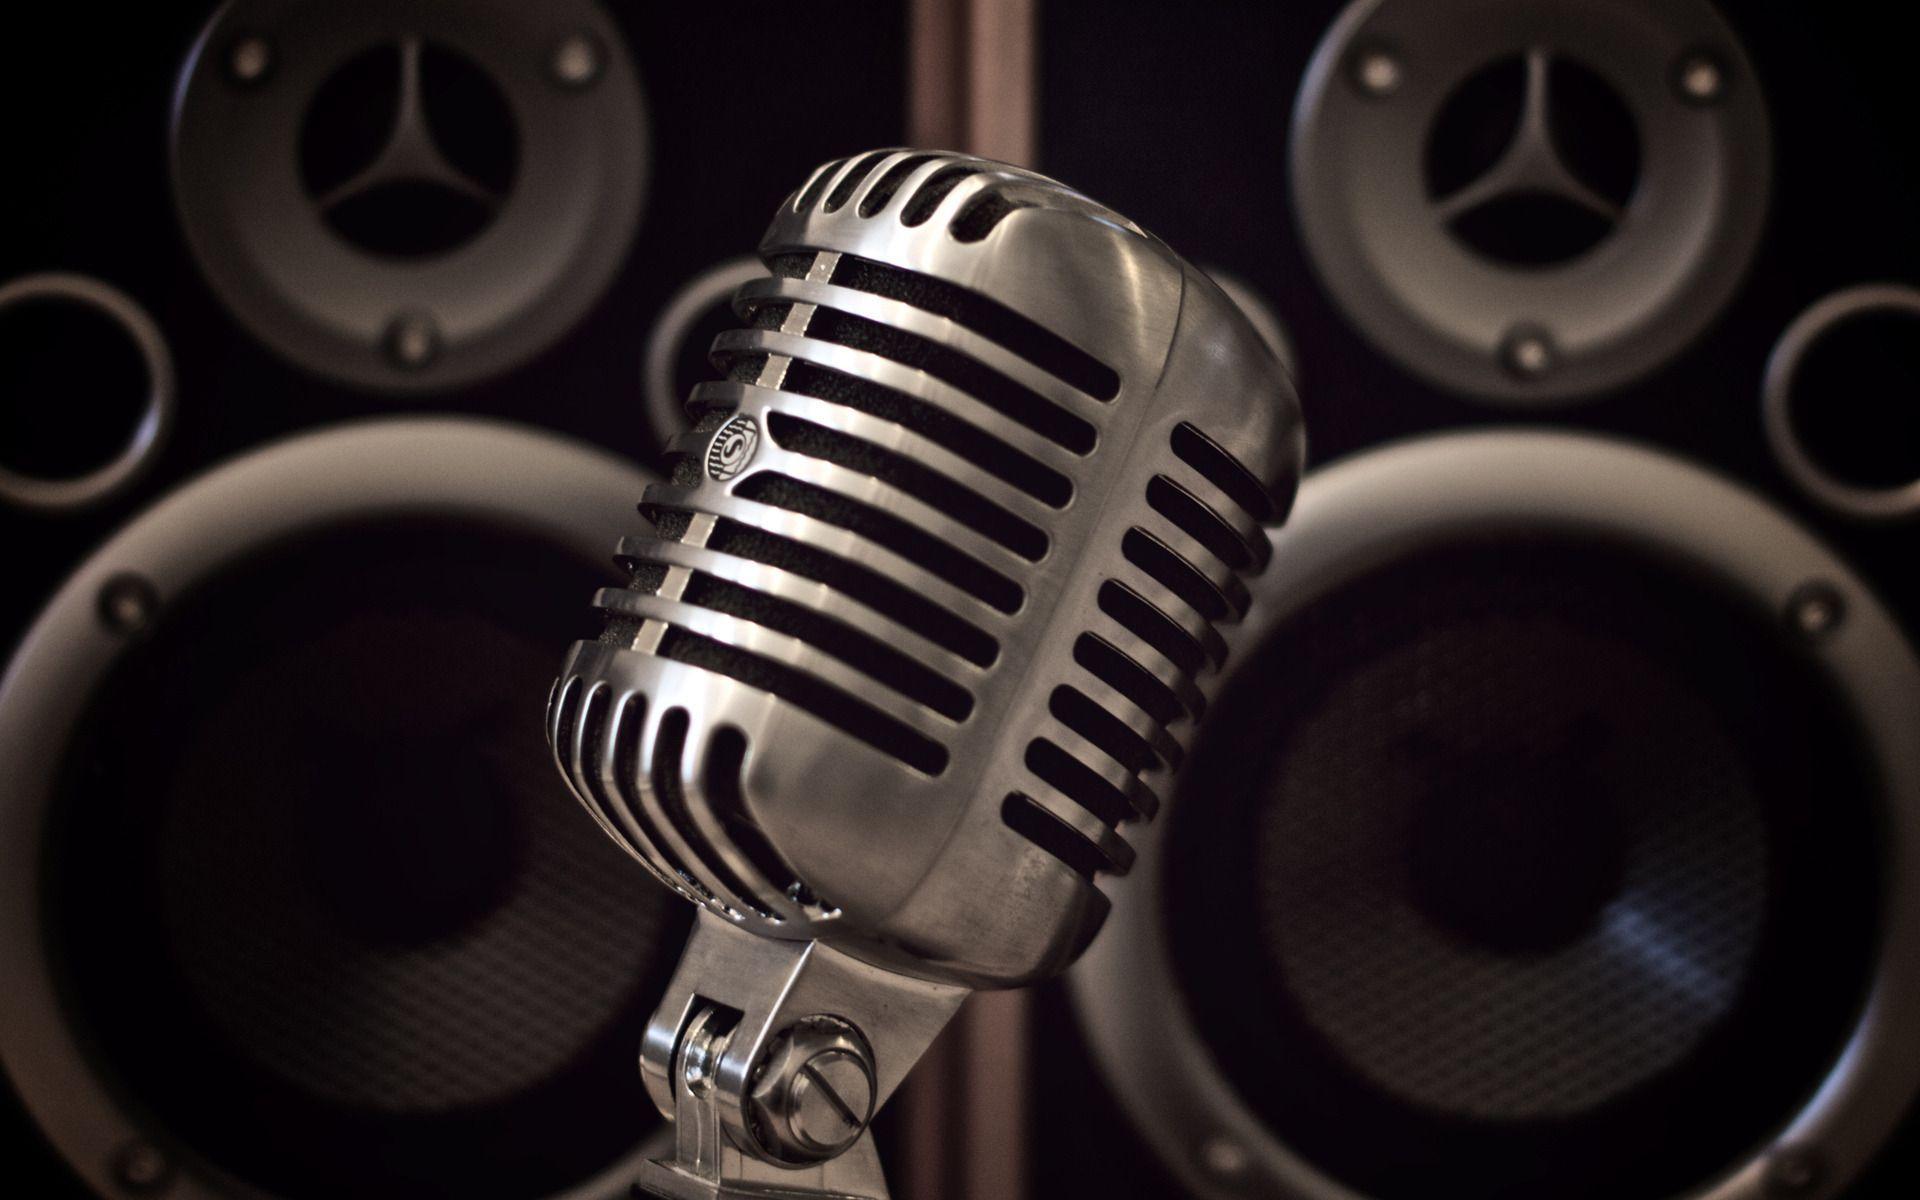 Gallery For > Microphone Wallpaper